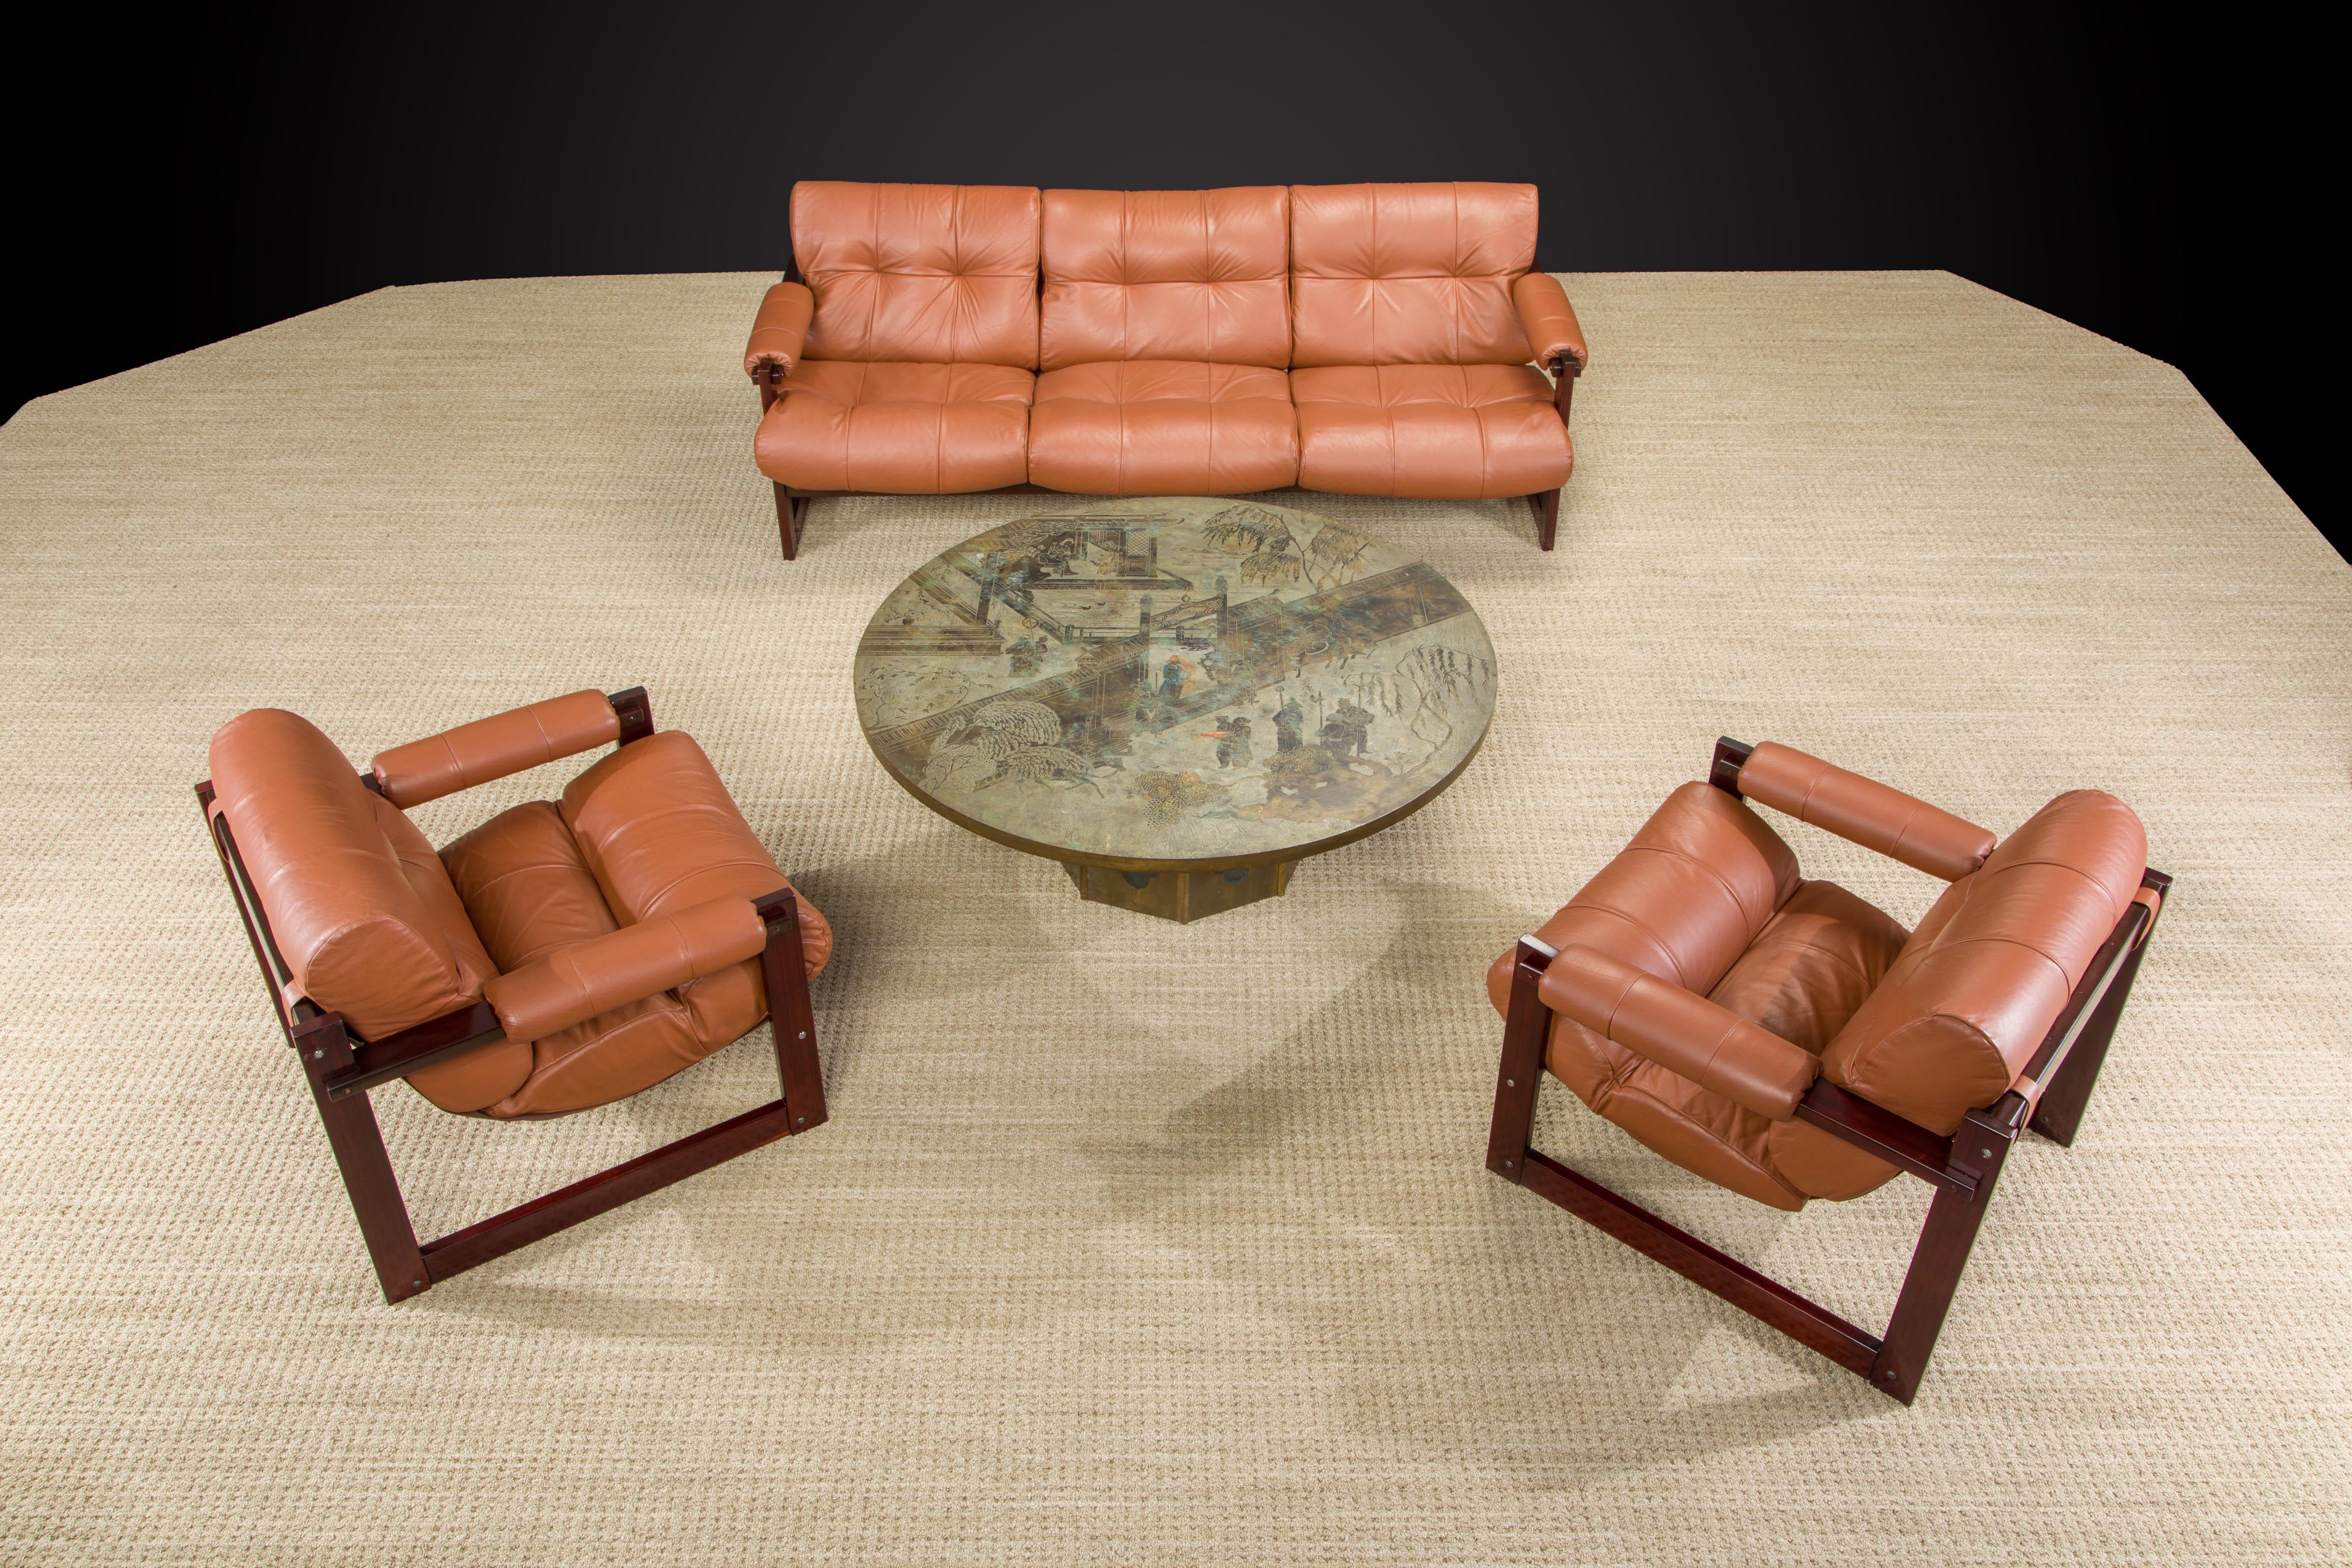 Late 20th Century Percival Lafer 'S-1' Rosewood and Leather Living Room Set, Brazil, 1976, Signed